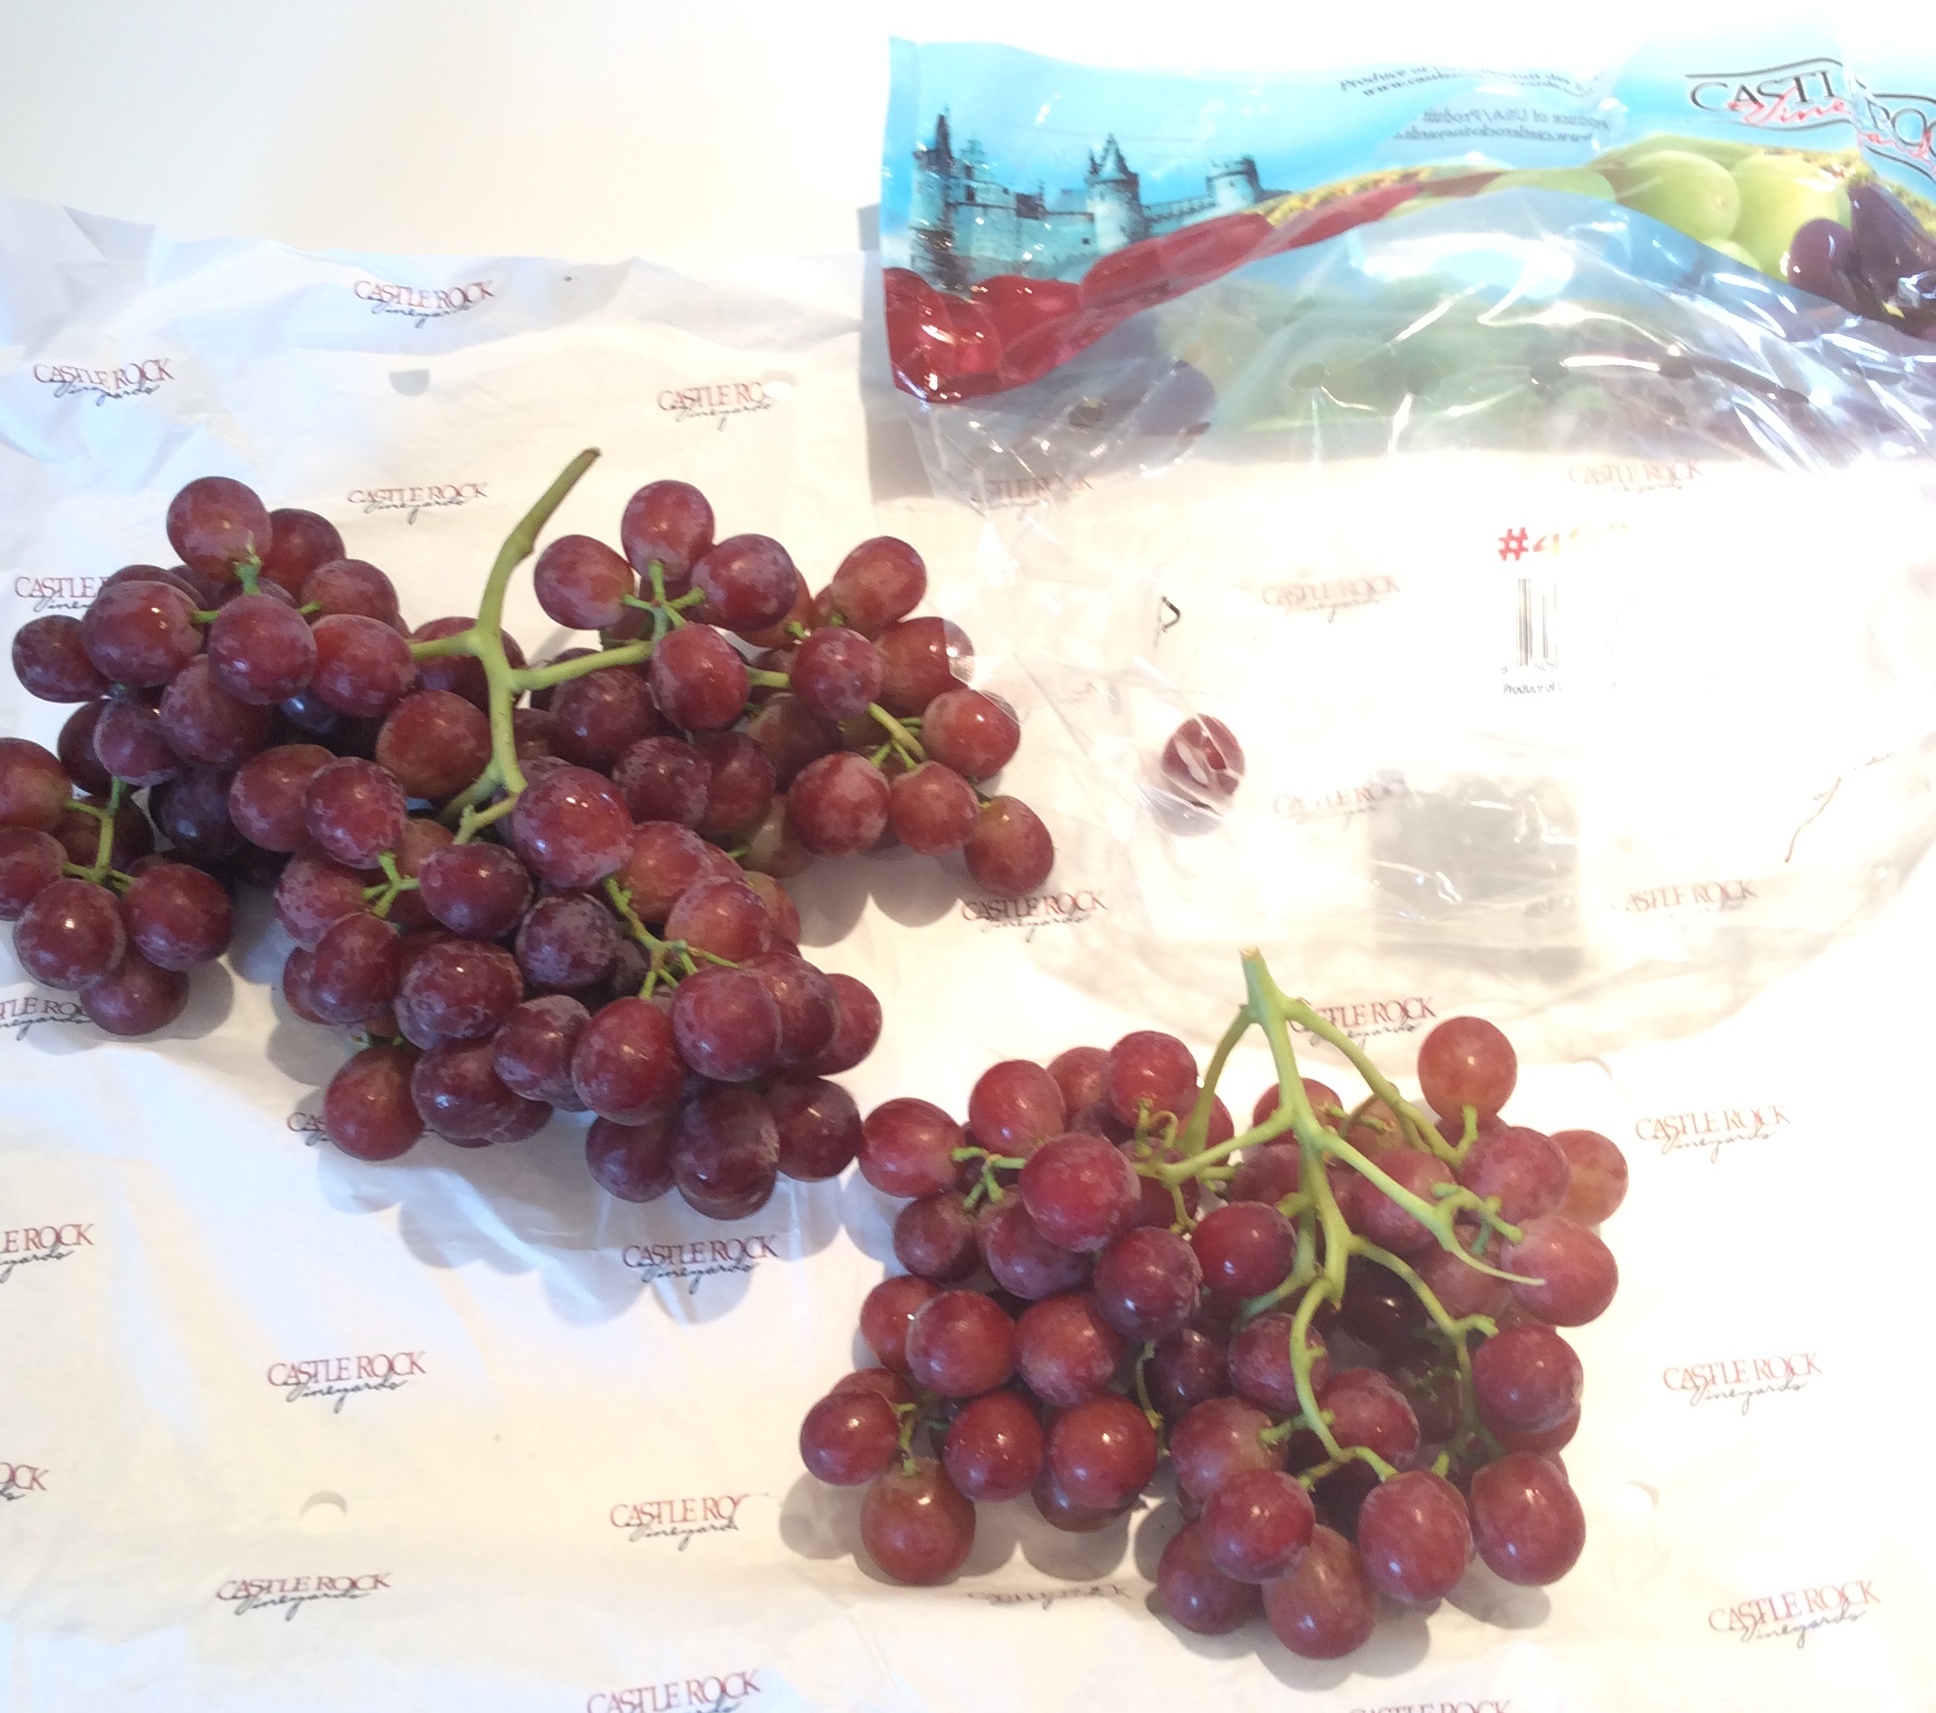 THE RED GRAPE-